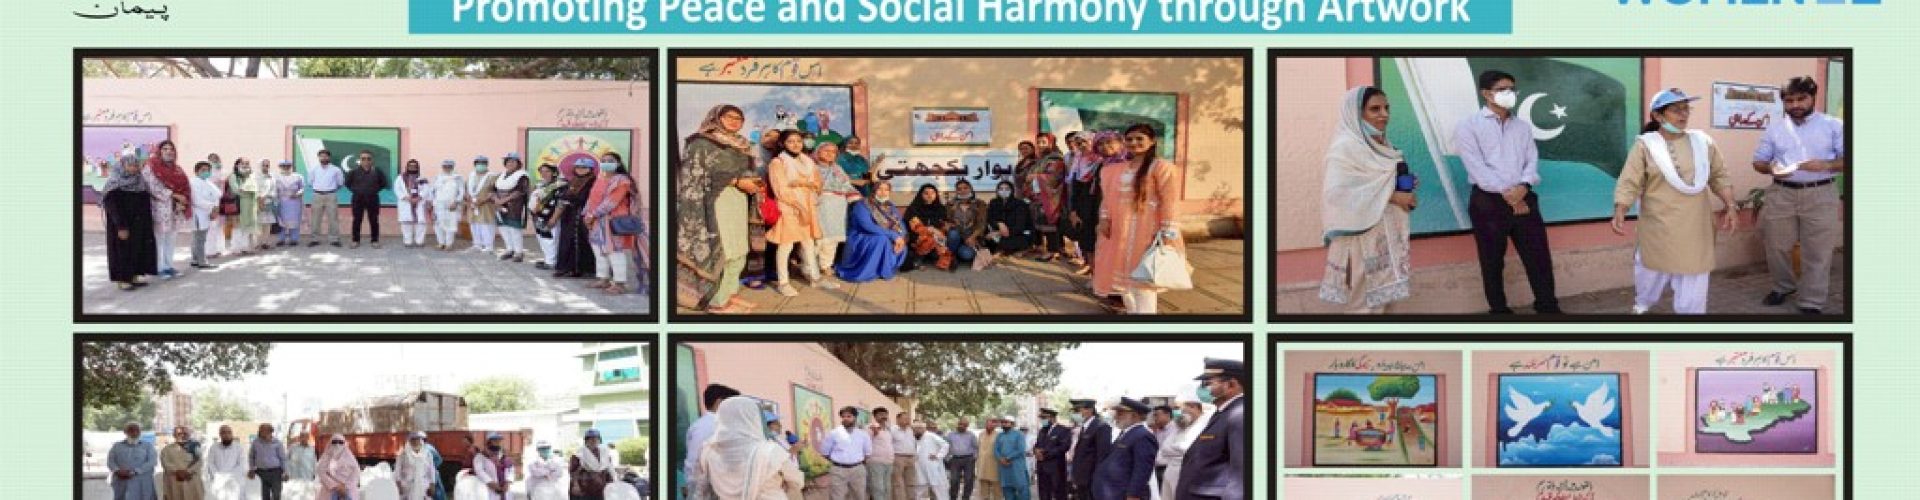 Promoting Peace and Social Harmony through Artwork